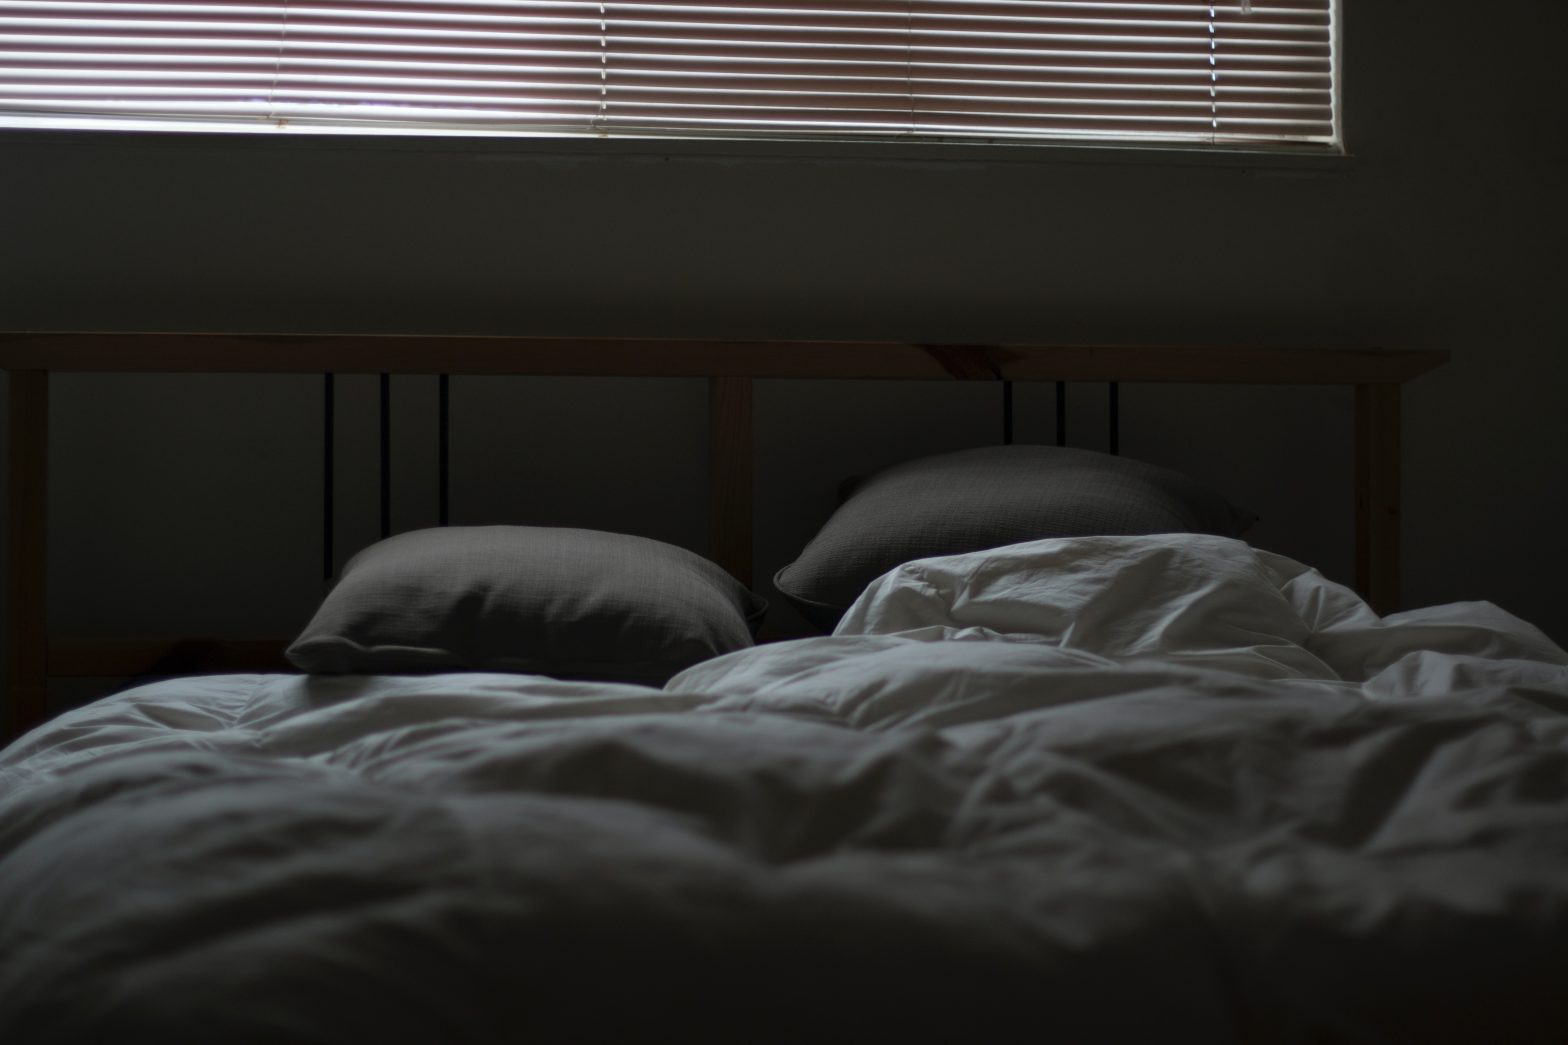 An empty bed with two pillows to illustrate lack of sleep in menopause